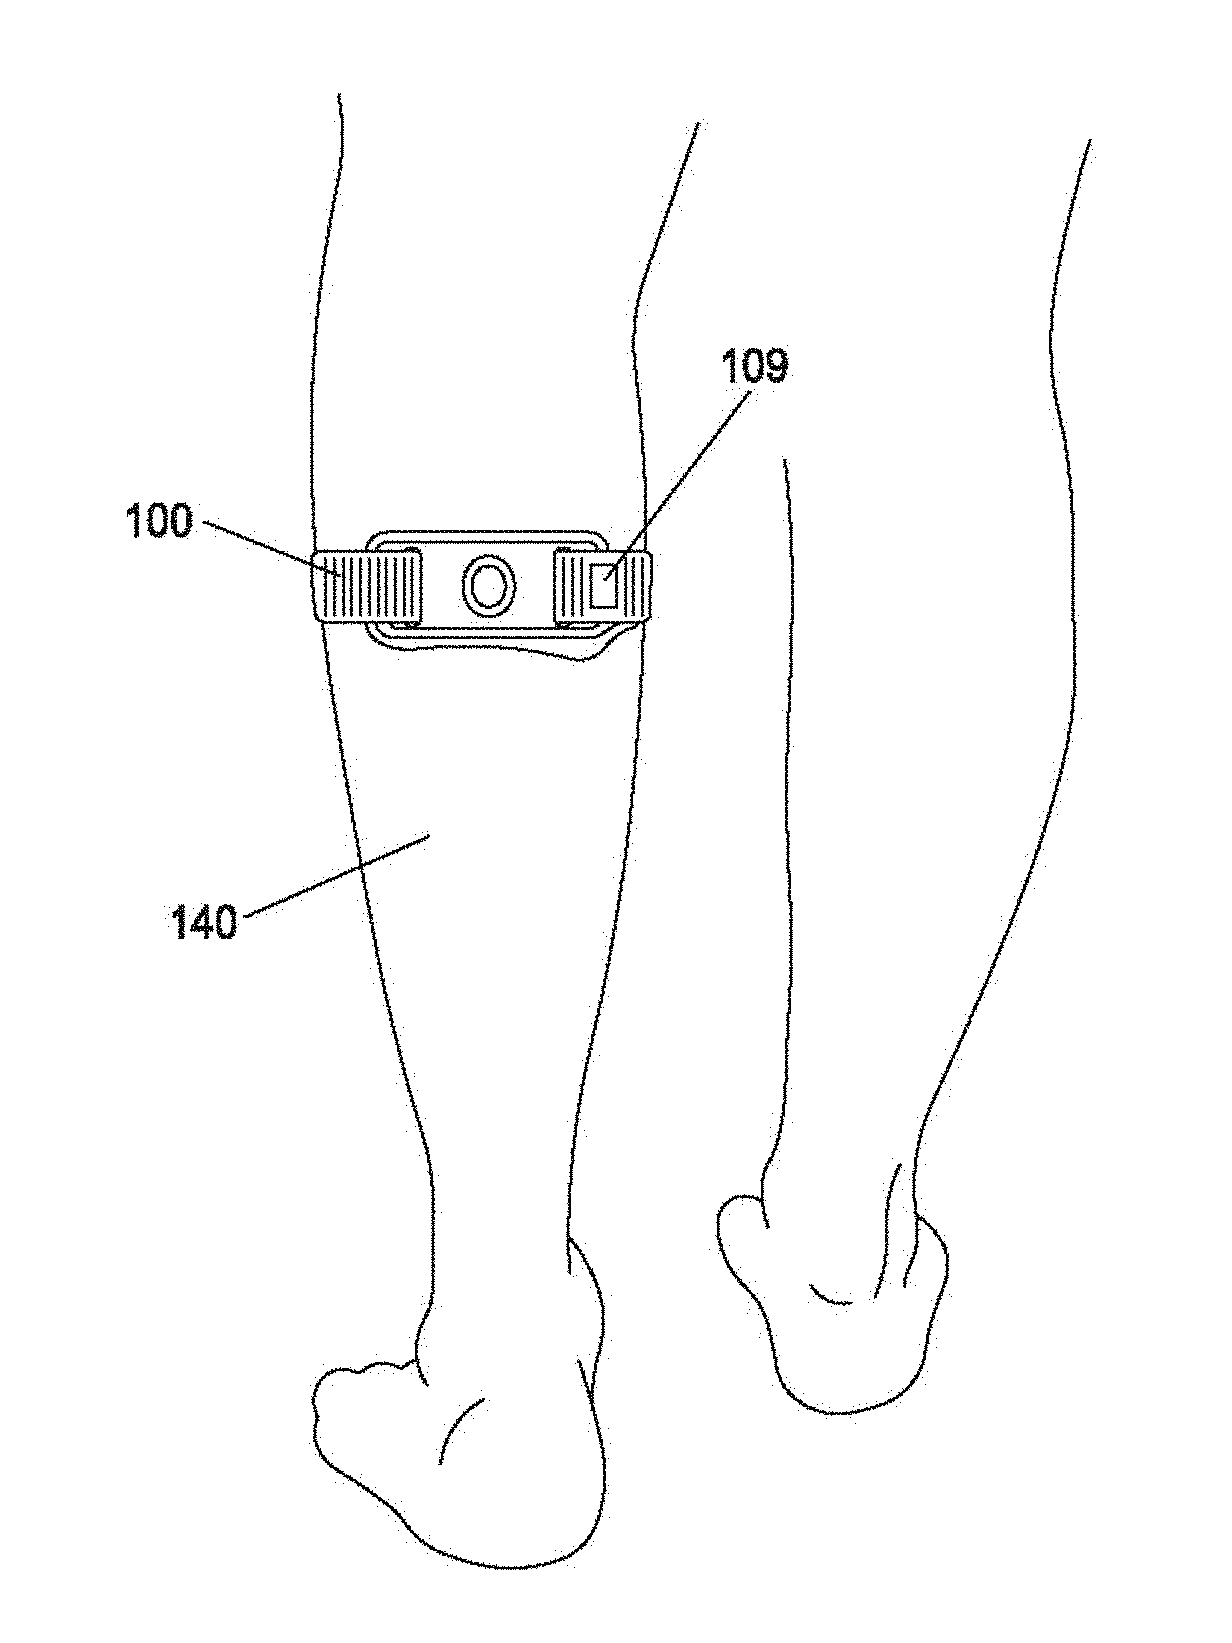 Dynamic control of transcutaneous electrical nerve stimulation therapy using continuous sleep detection